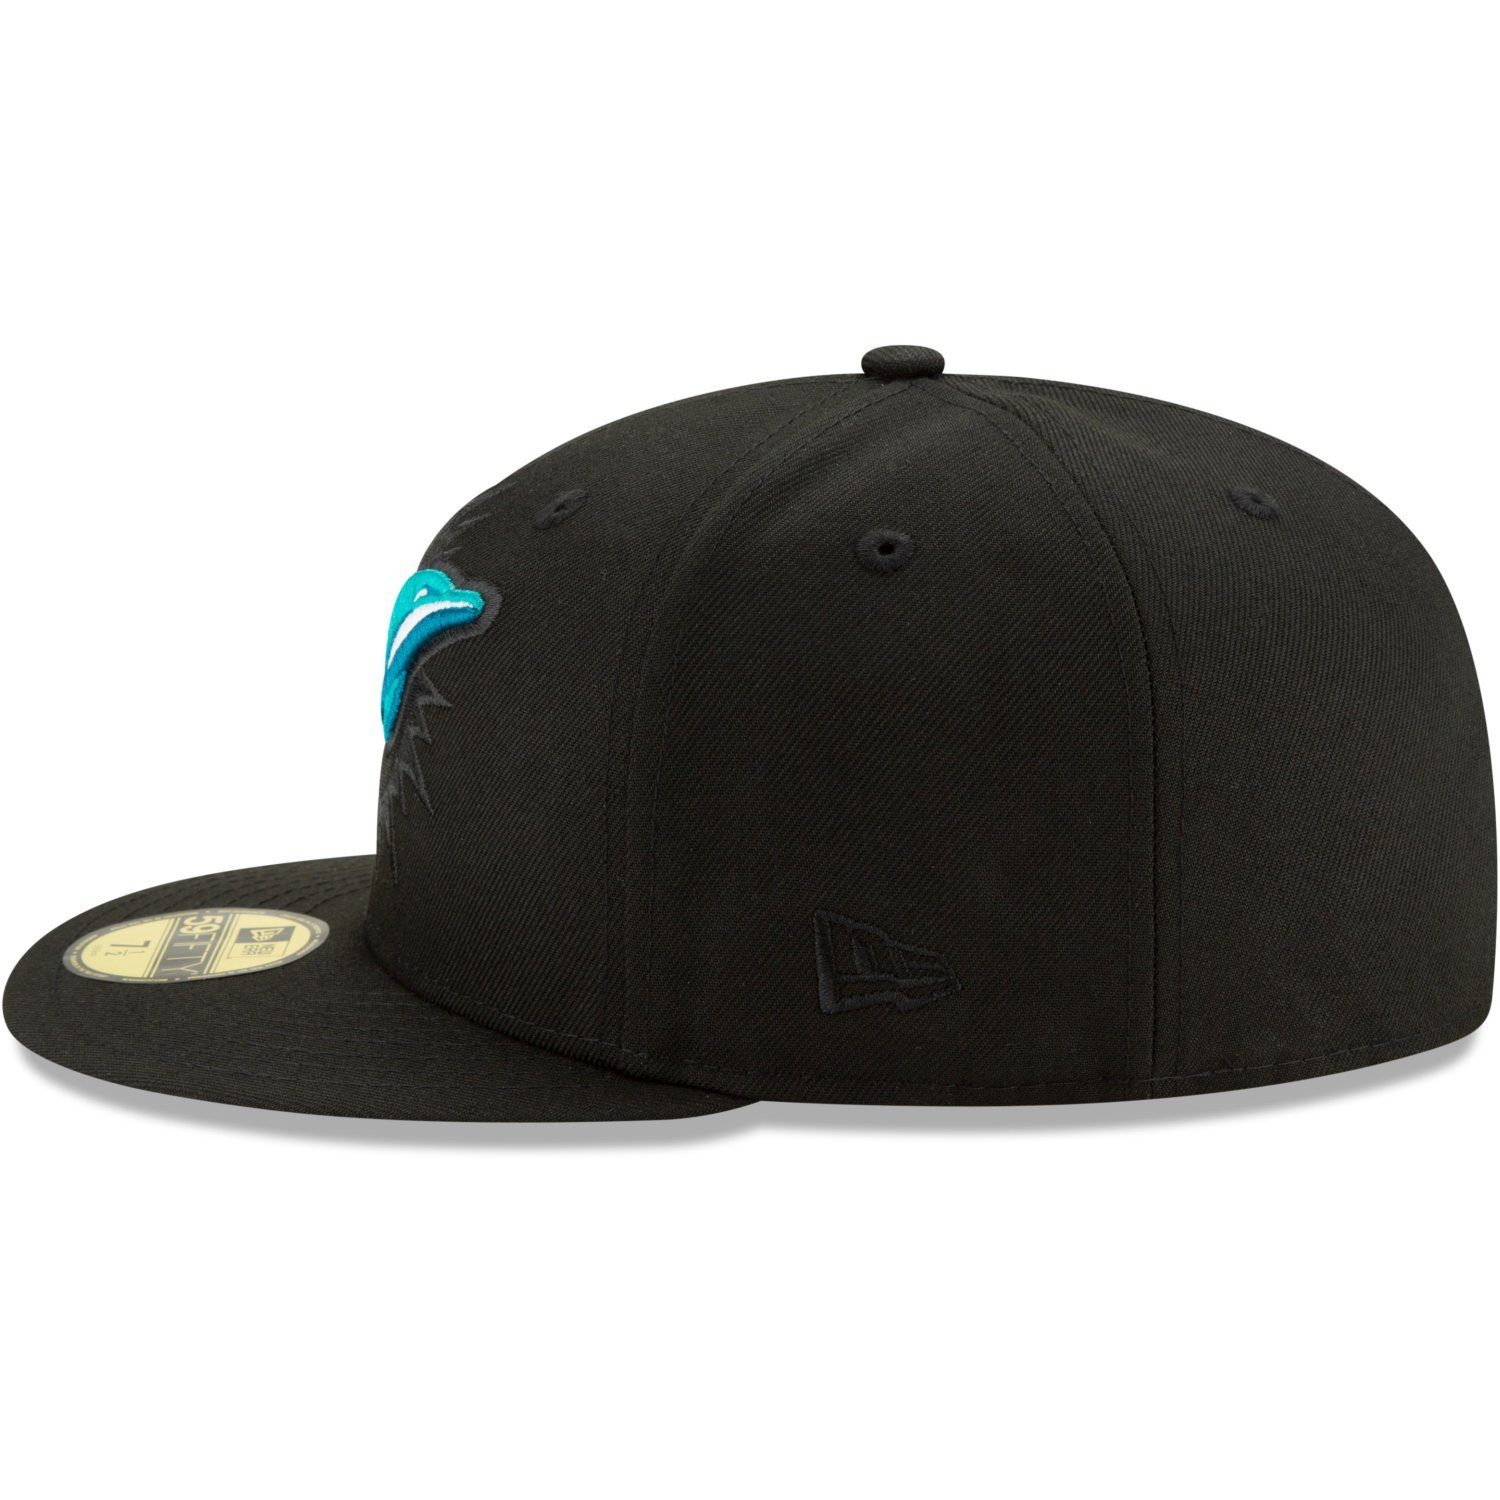 New Era Fitted Cap 59Fifty 2.0 ELEMENTS Miami NFL Dolphins